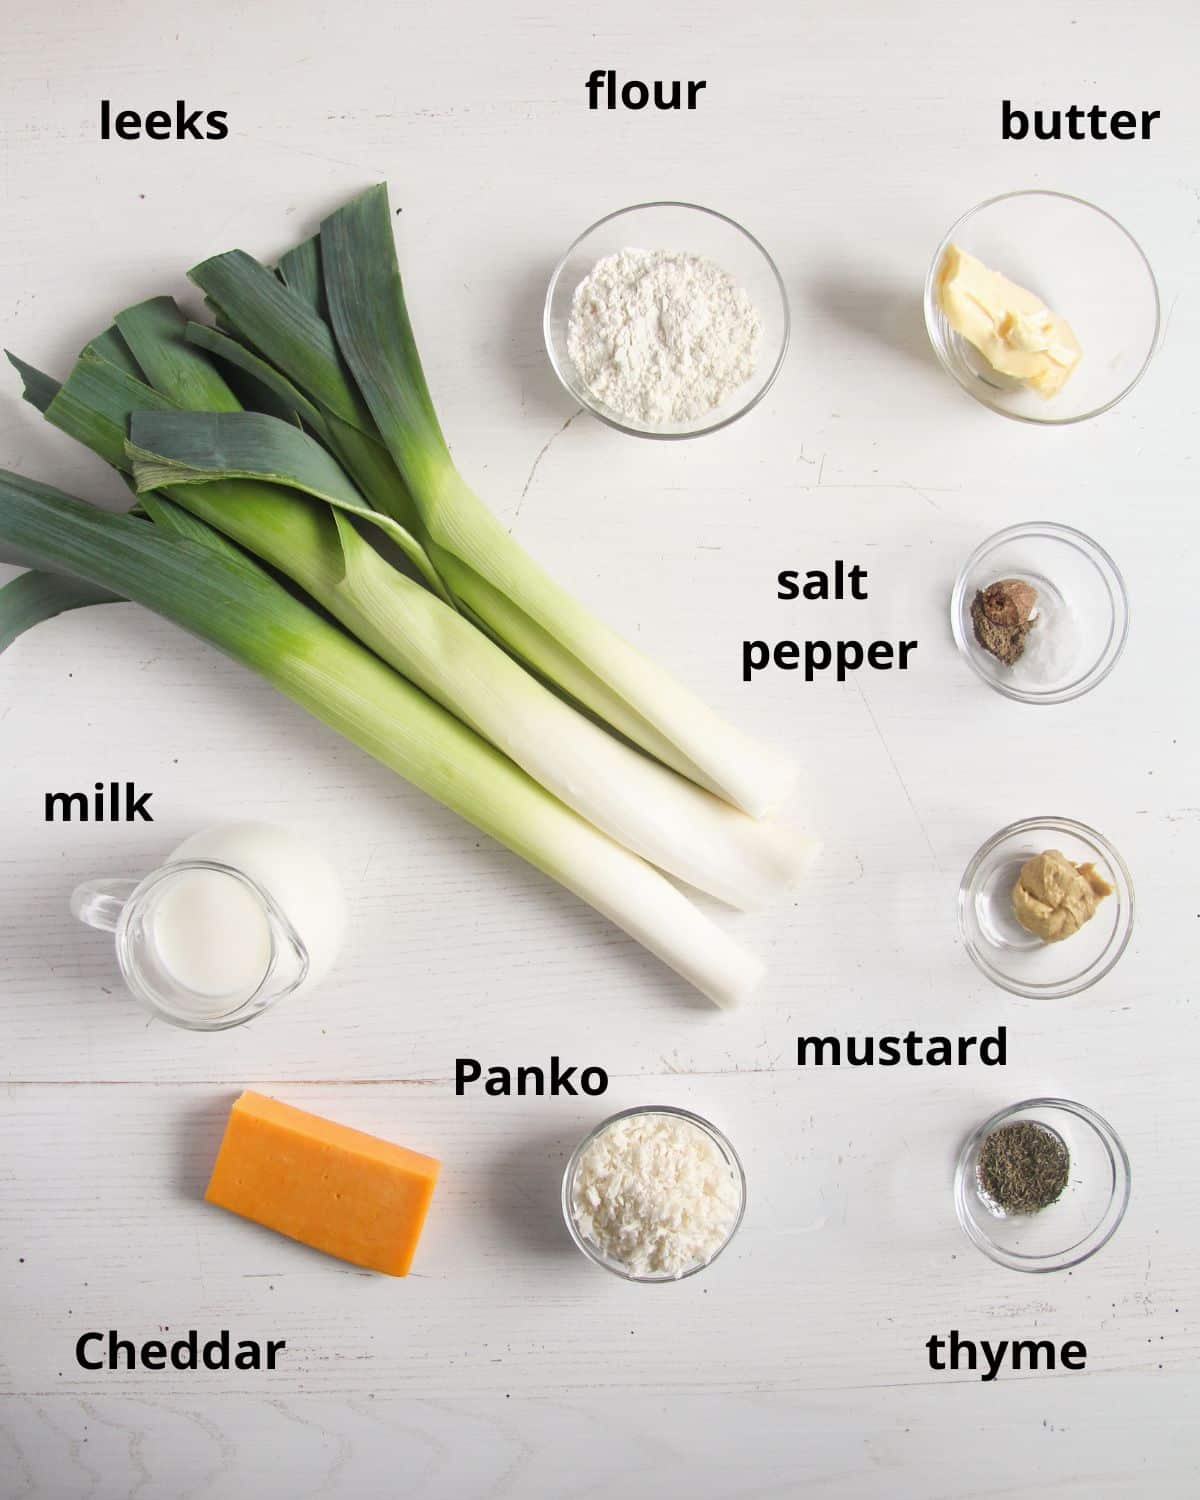 listed ingredients for making leeks in white sauce with cheddar and panko topping.